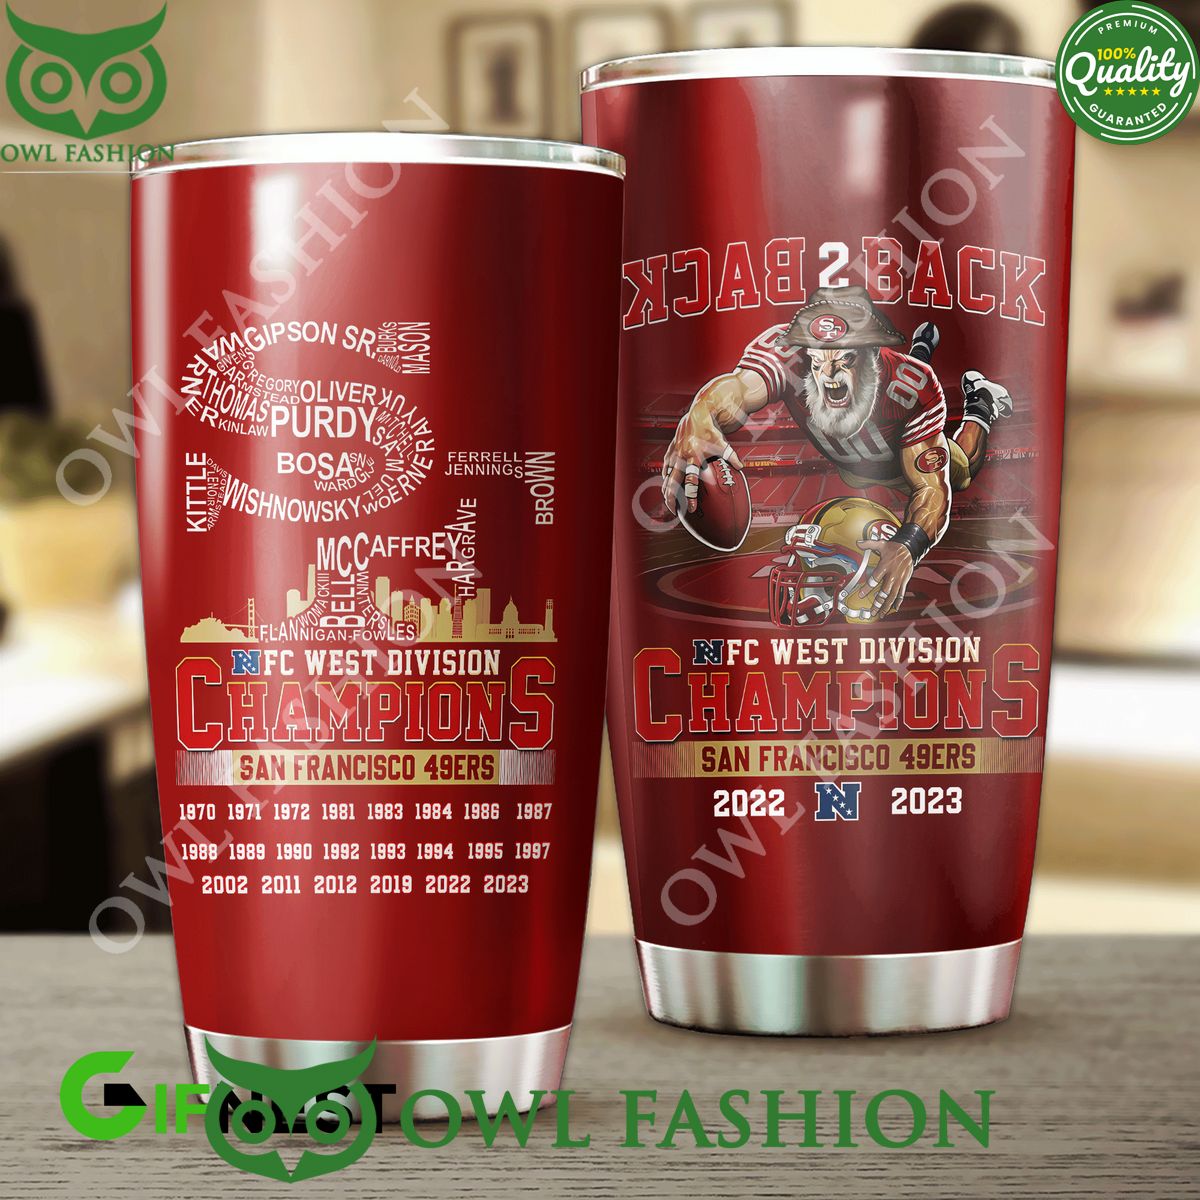 sf49 nfc west champions back 2 back red tumbler cup 1 Hg1T3.jpg